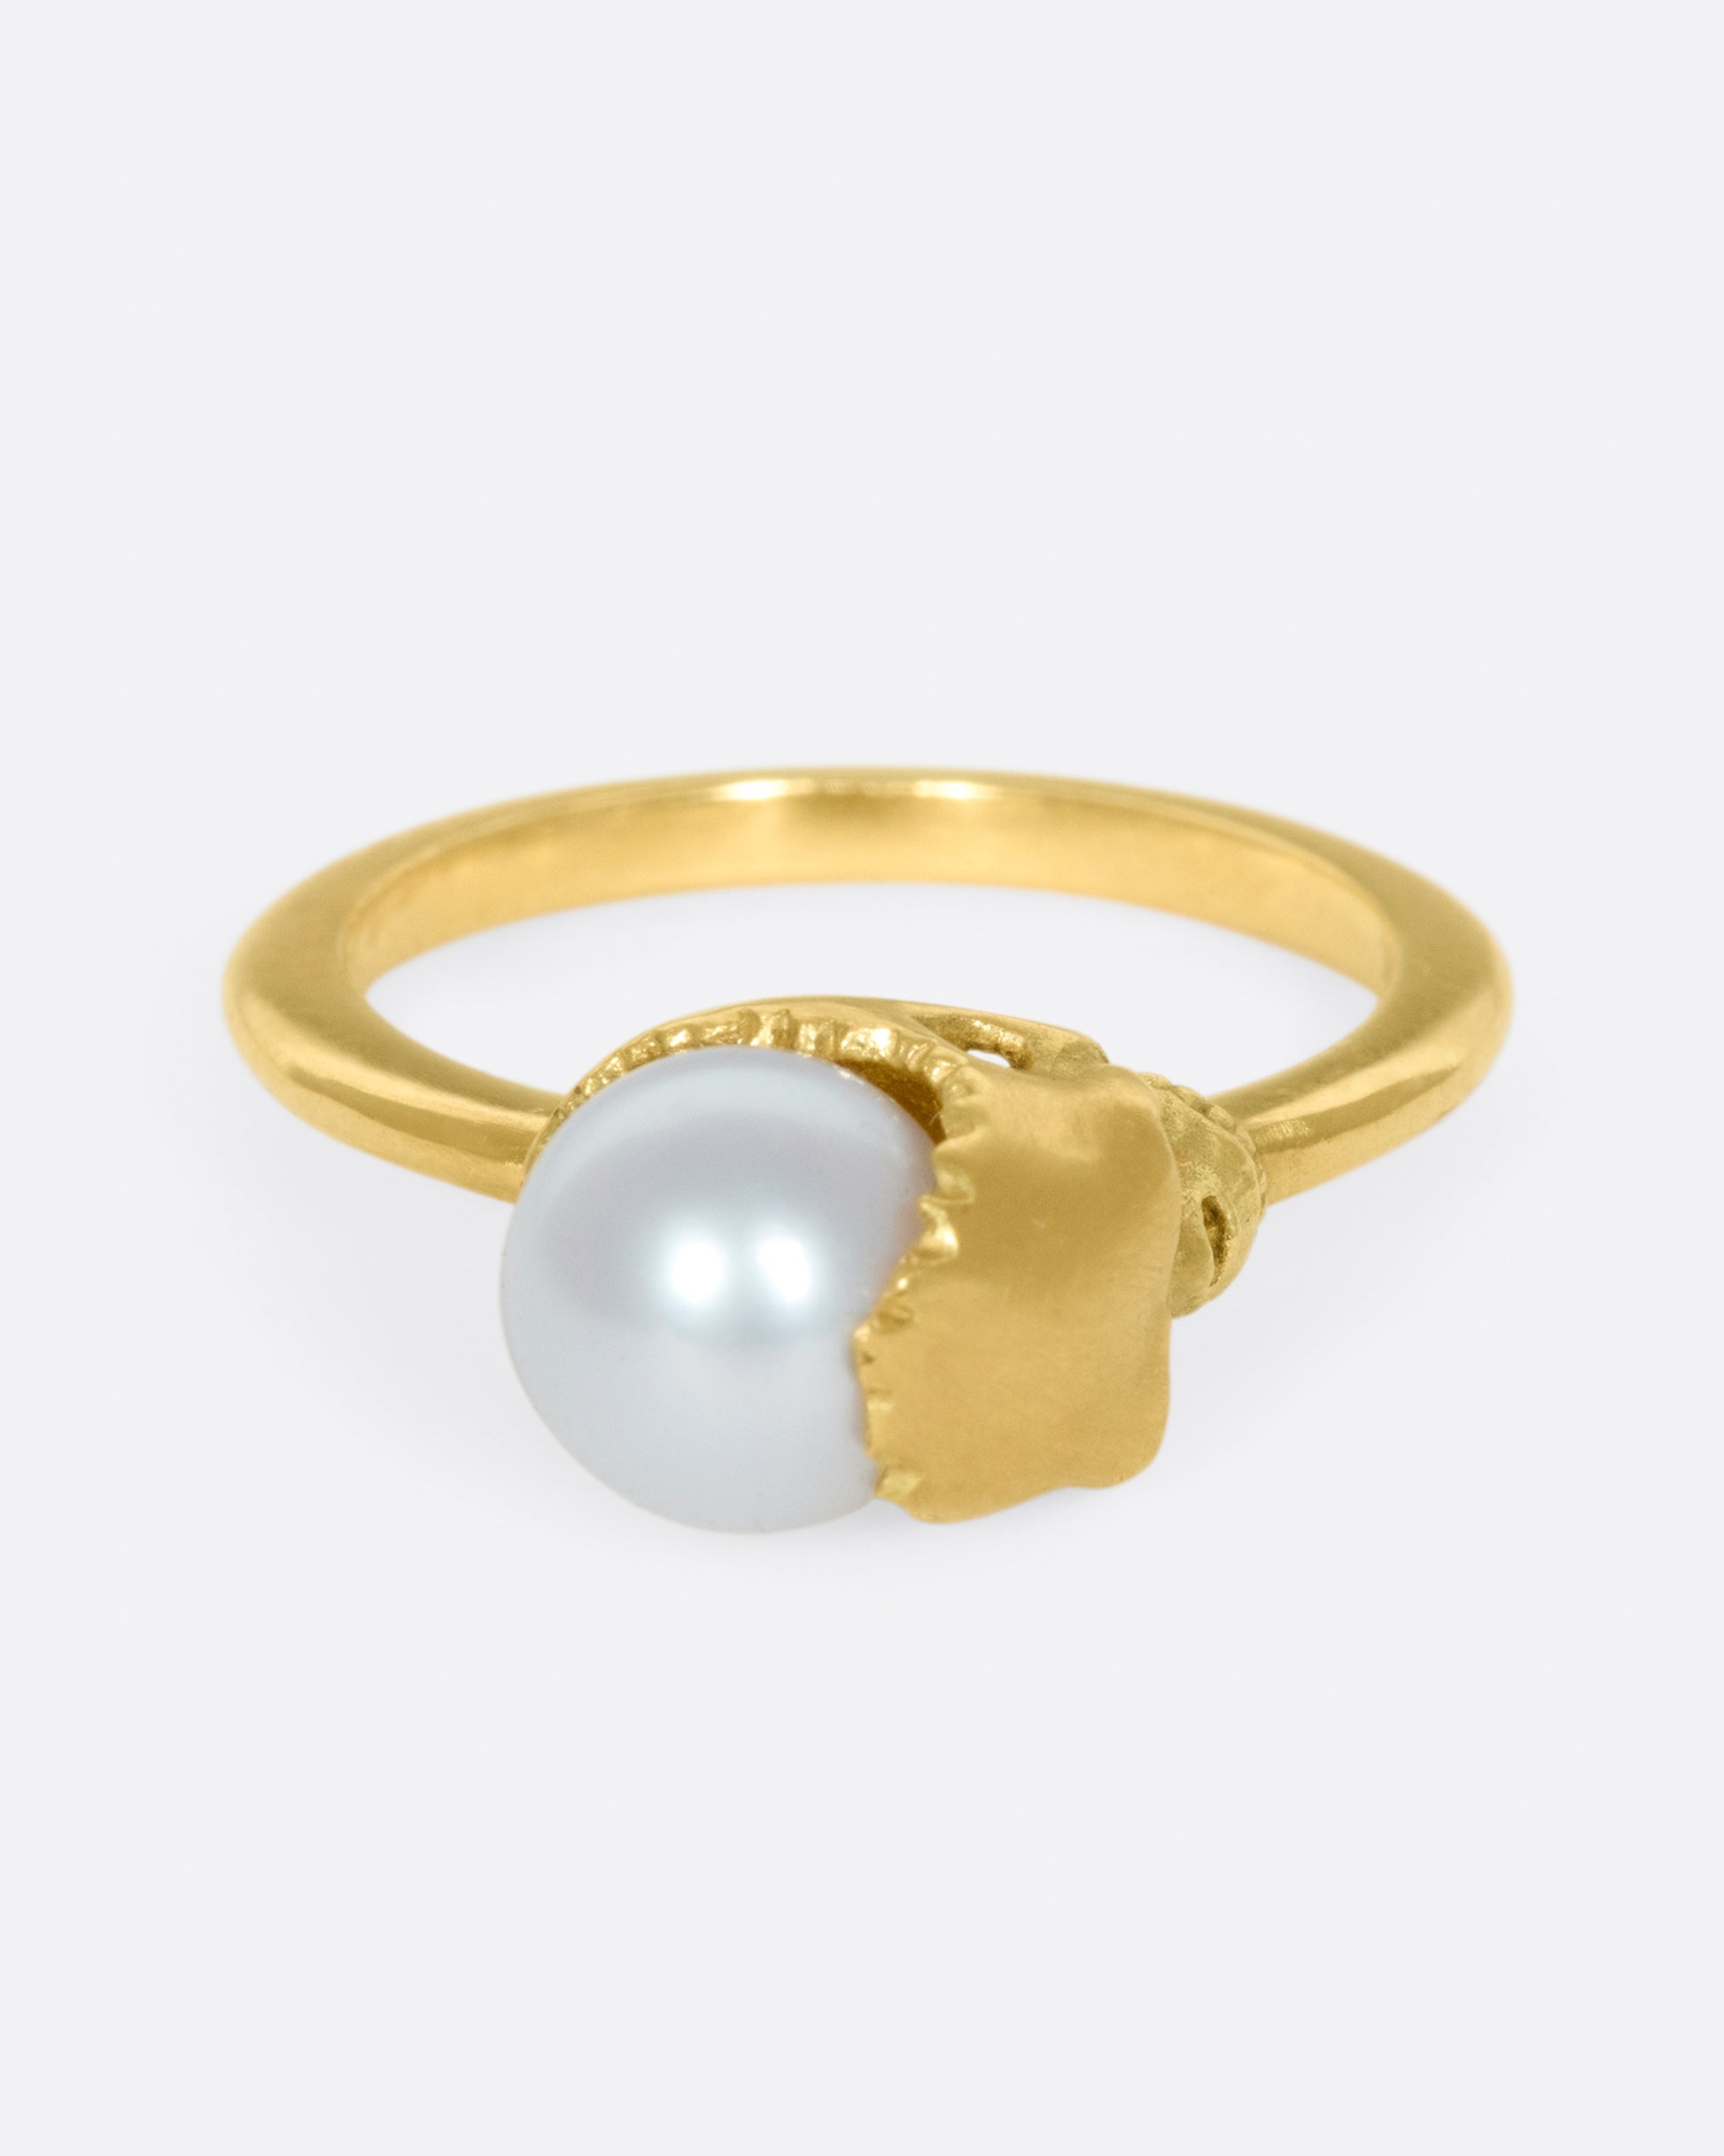 Based on the anatomical sketches of Leonardo da Vinci, this skull ring is very realistic and crowned with a freshwater pearl.